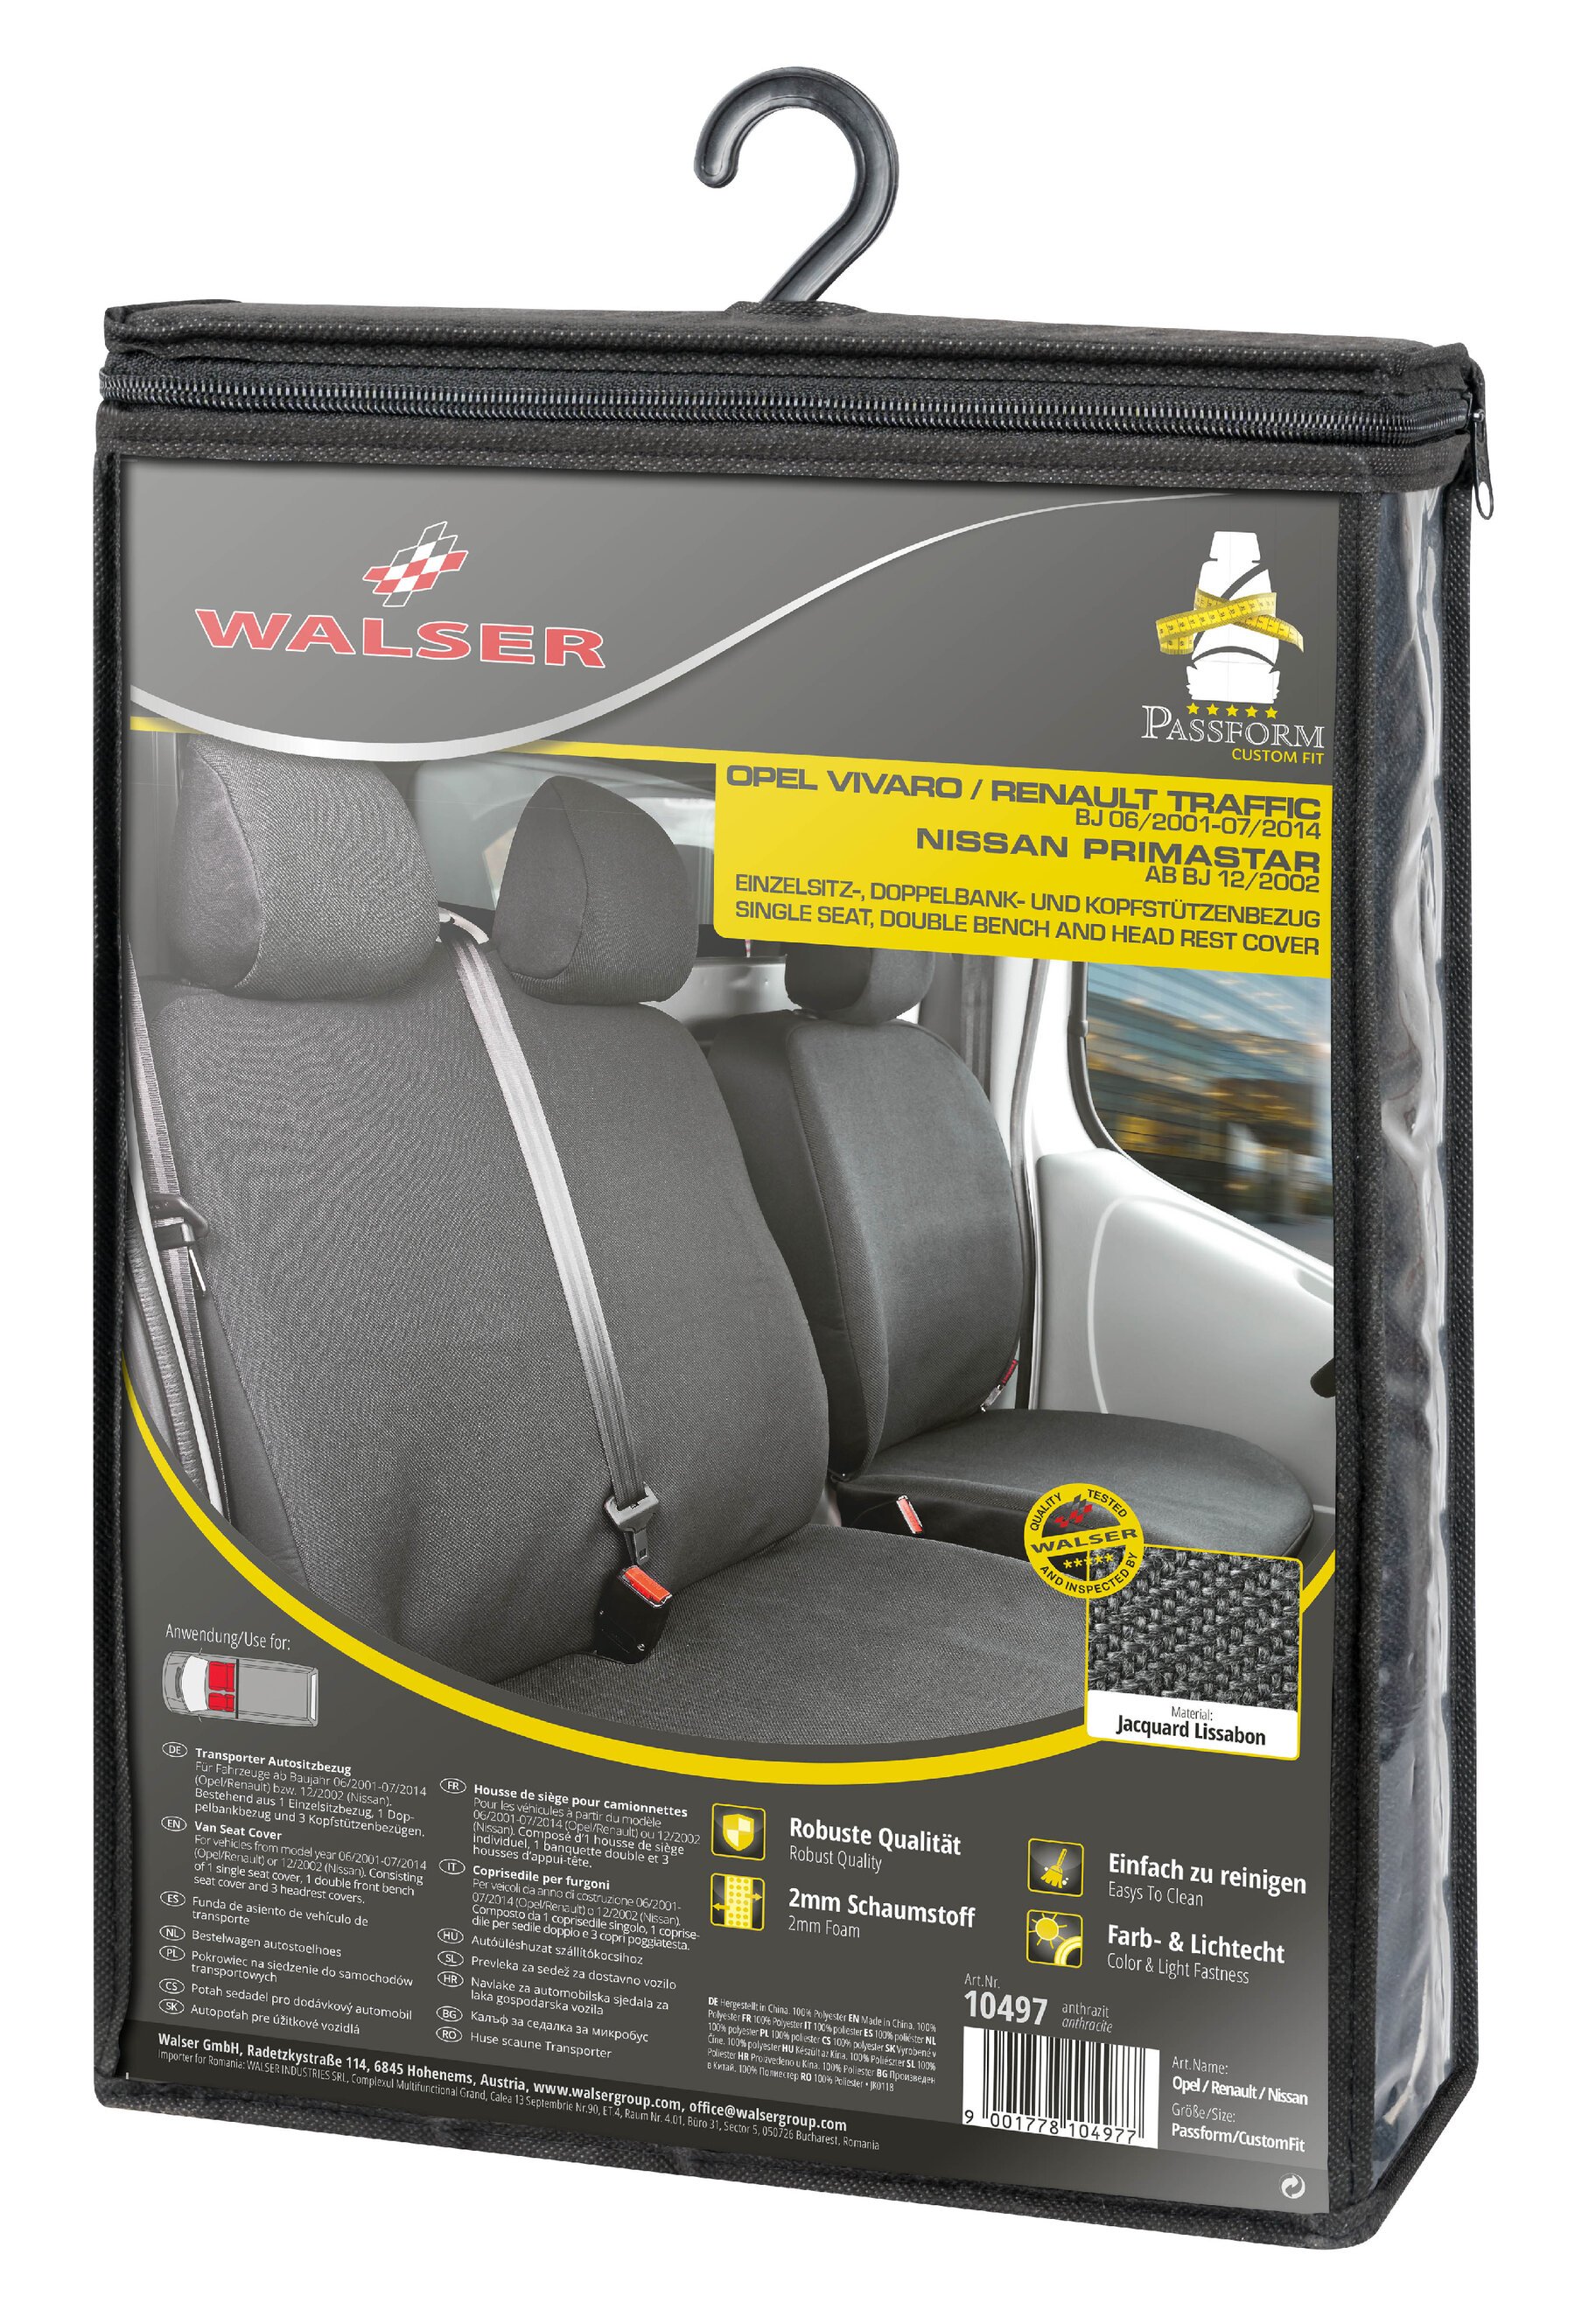 Seat cover made of fabric for Opel Vivaro, Renault Traffic, Nissan Primastar, single seat cover, double seat cover